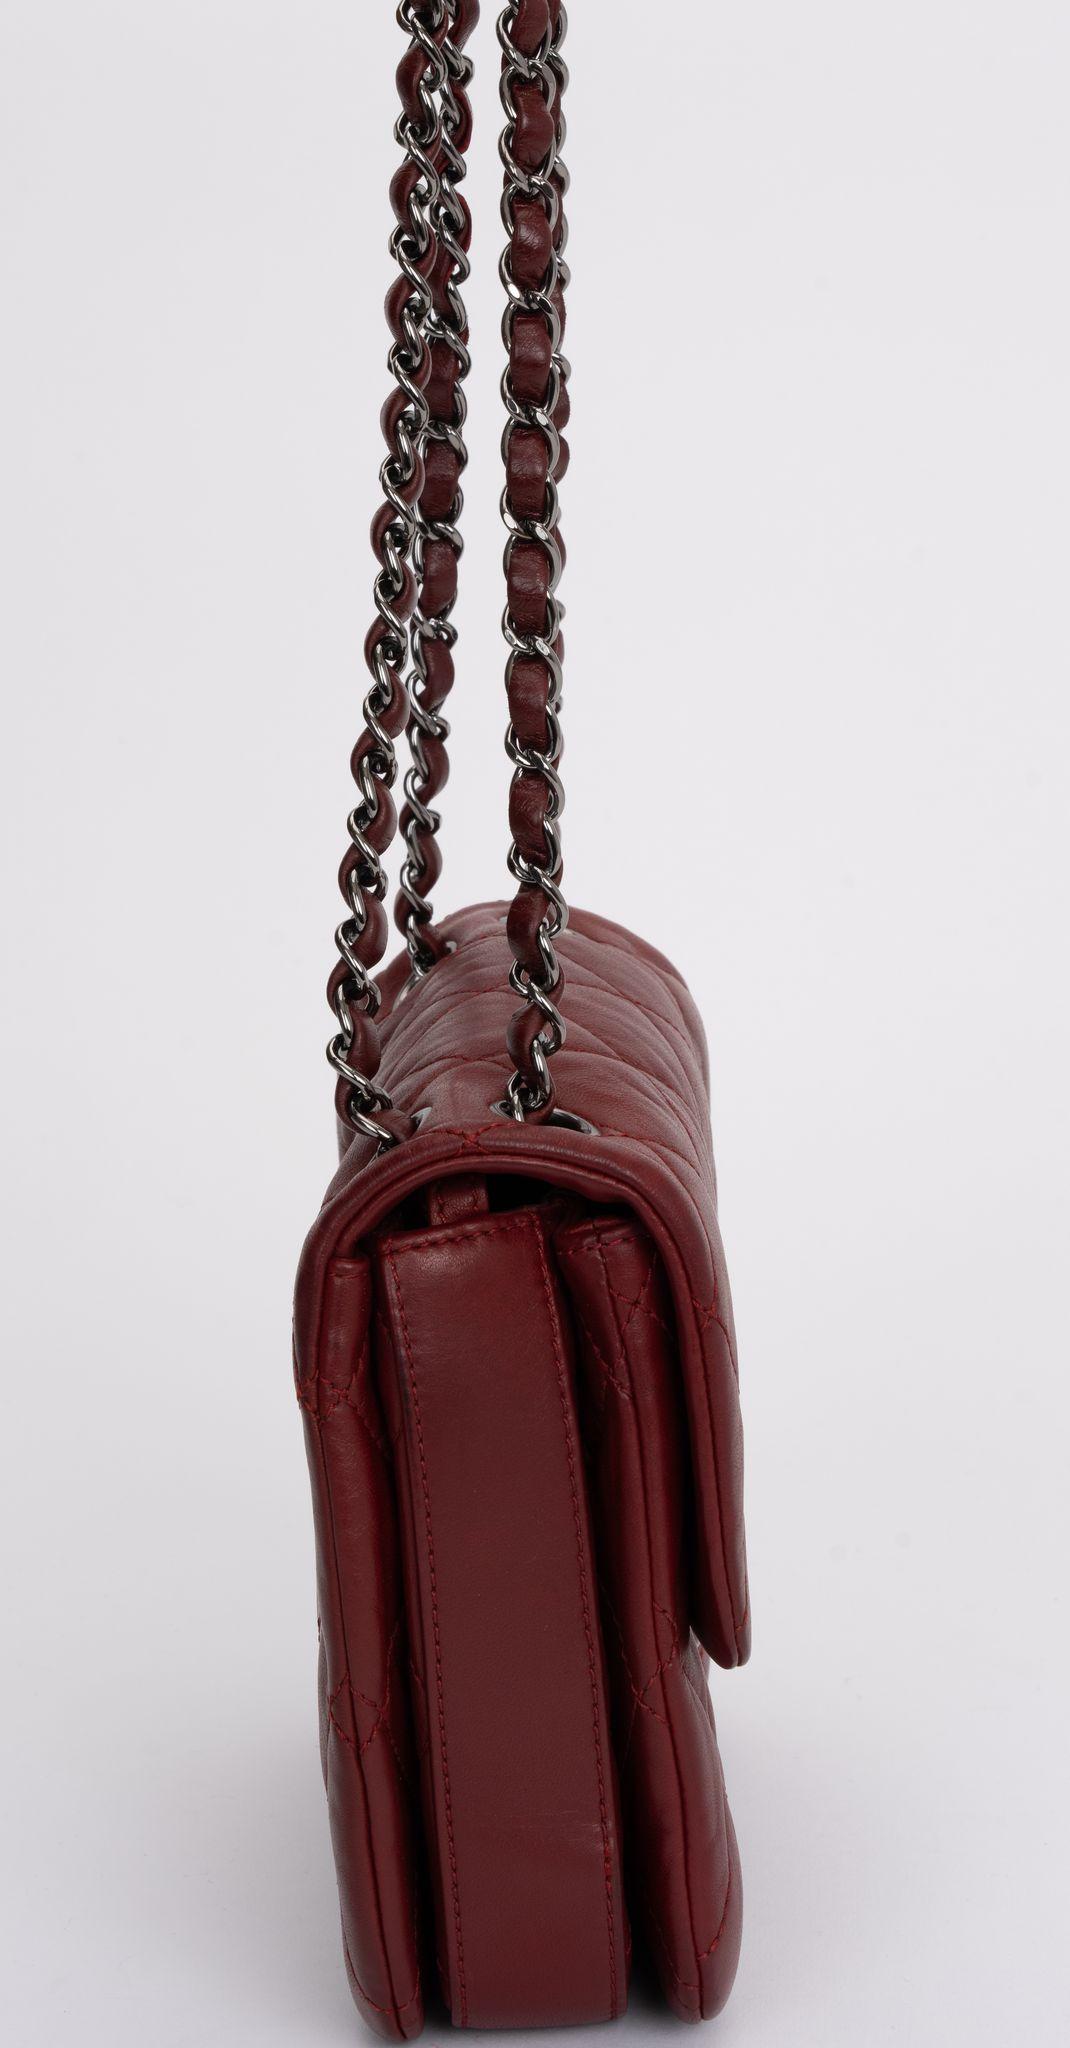 Chanel Burgundy Quilted Flap Bag In Excellent Condition For Sale In West Hollywood, CA